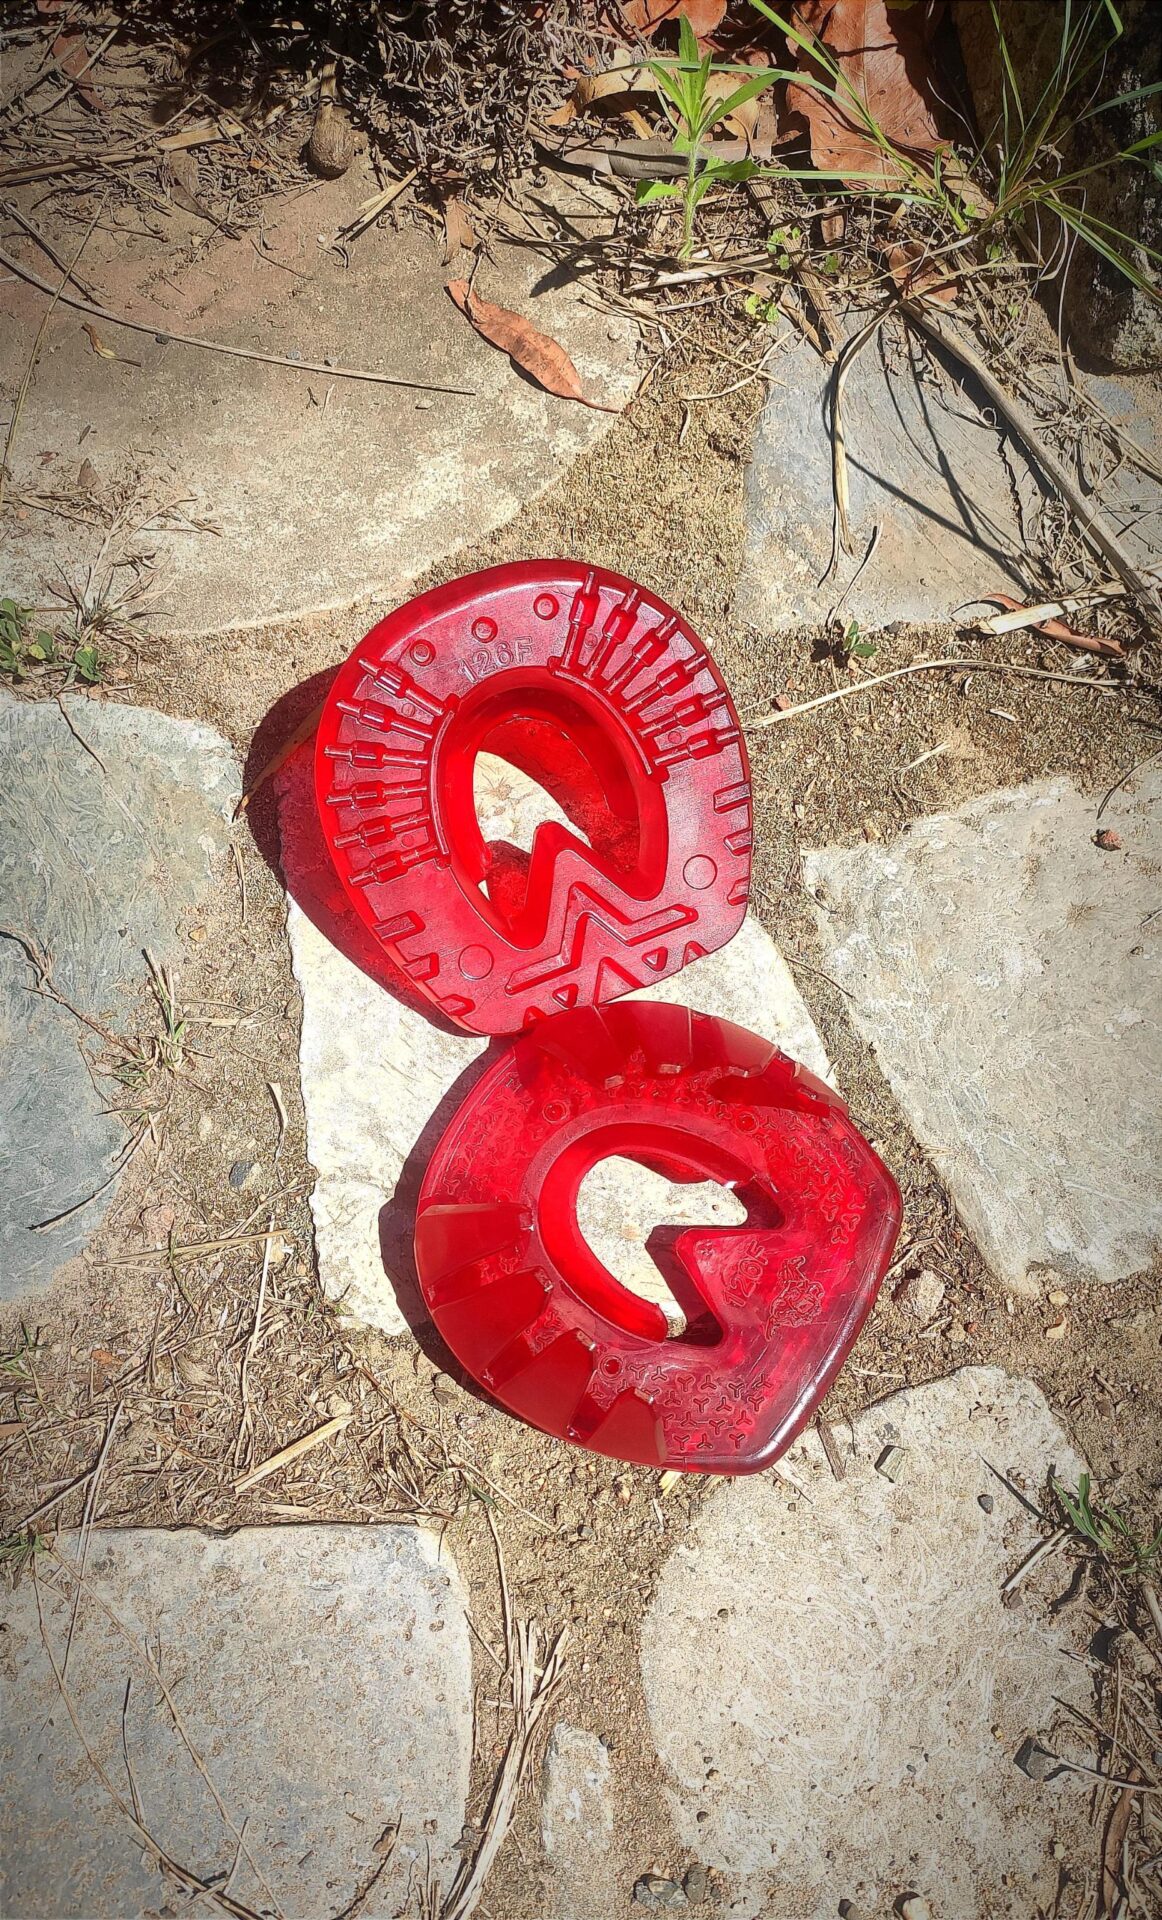 Glue-on horse shoes